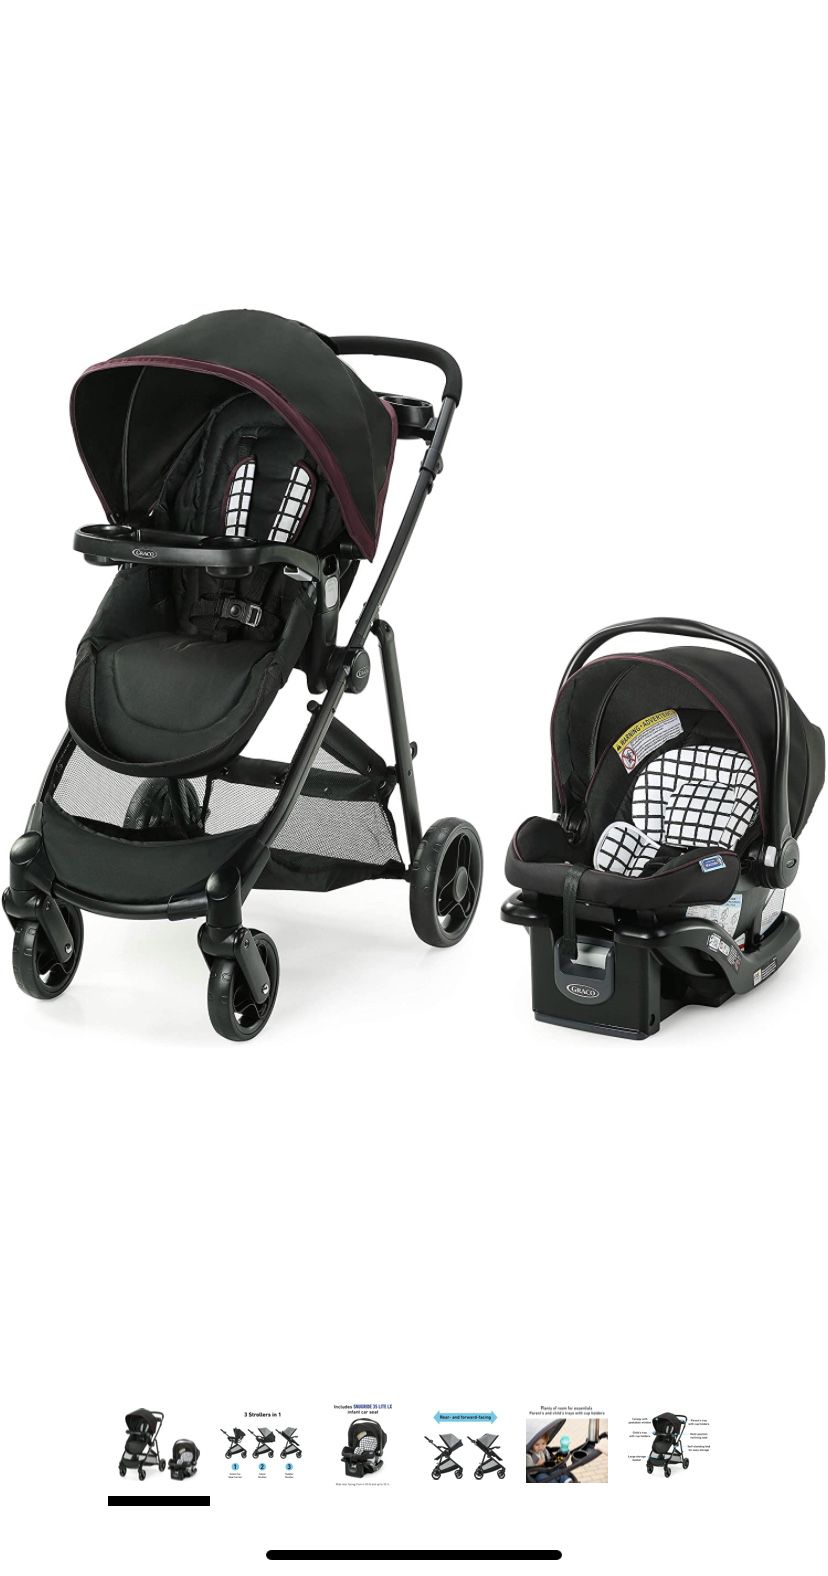 Baby Stroller And Baby Car Seat